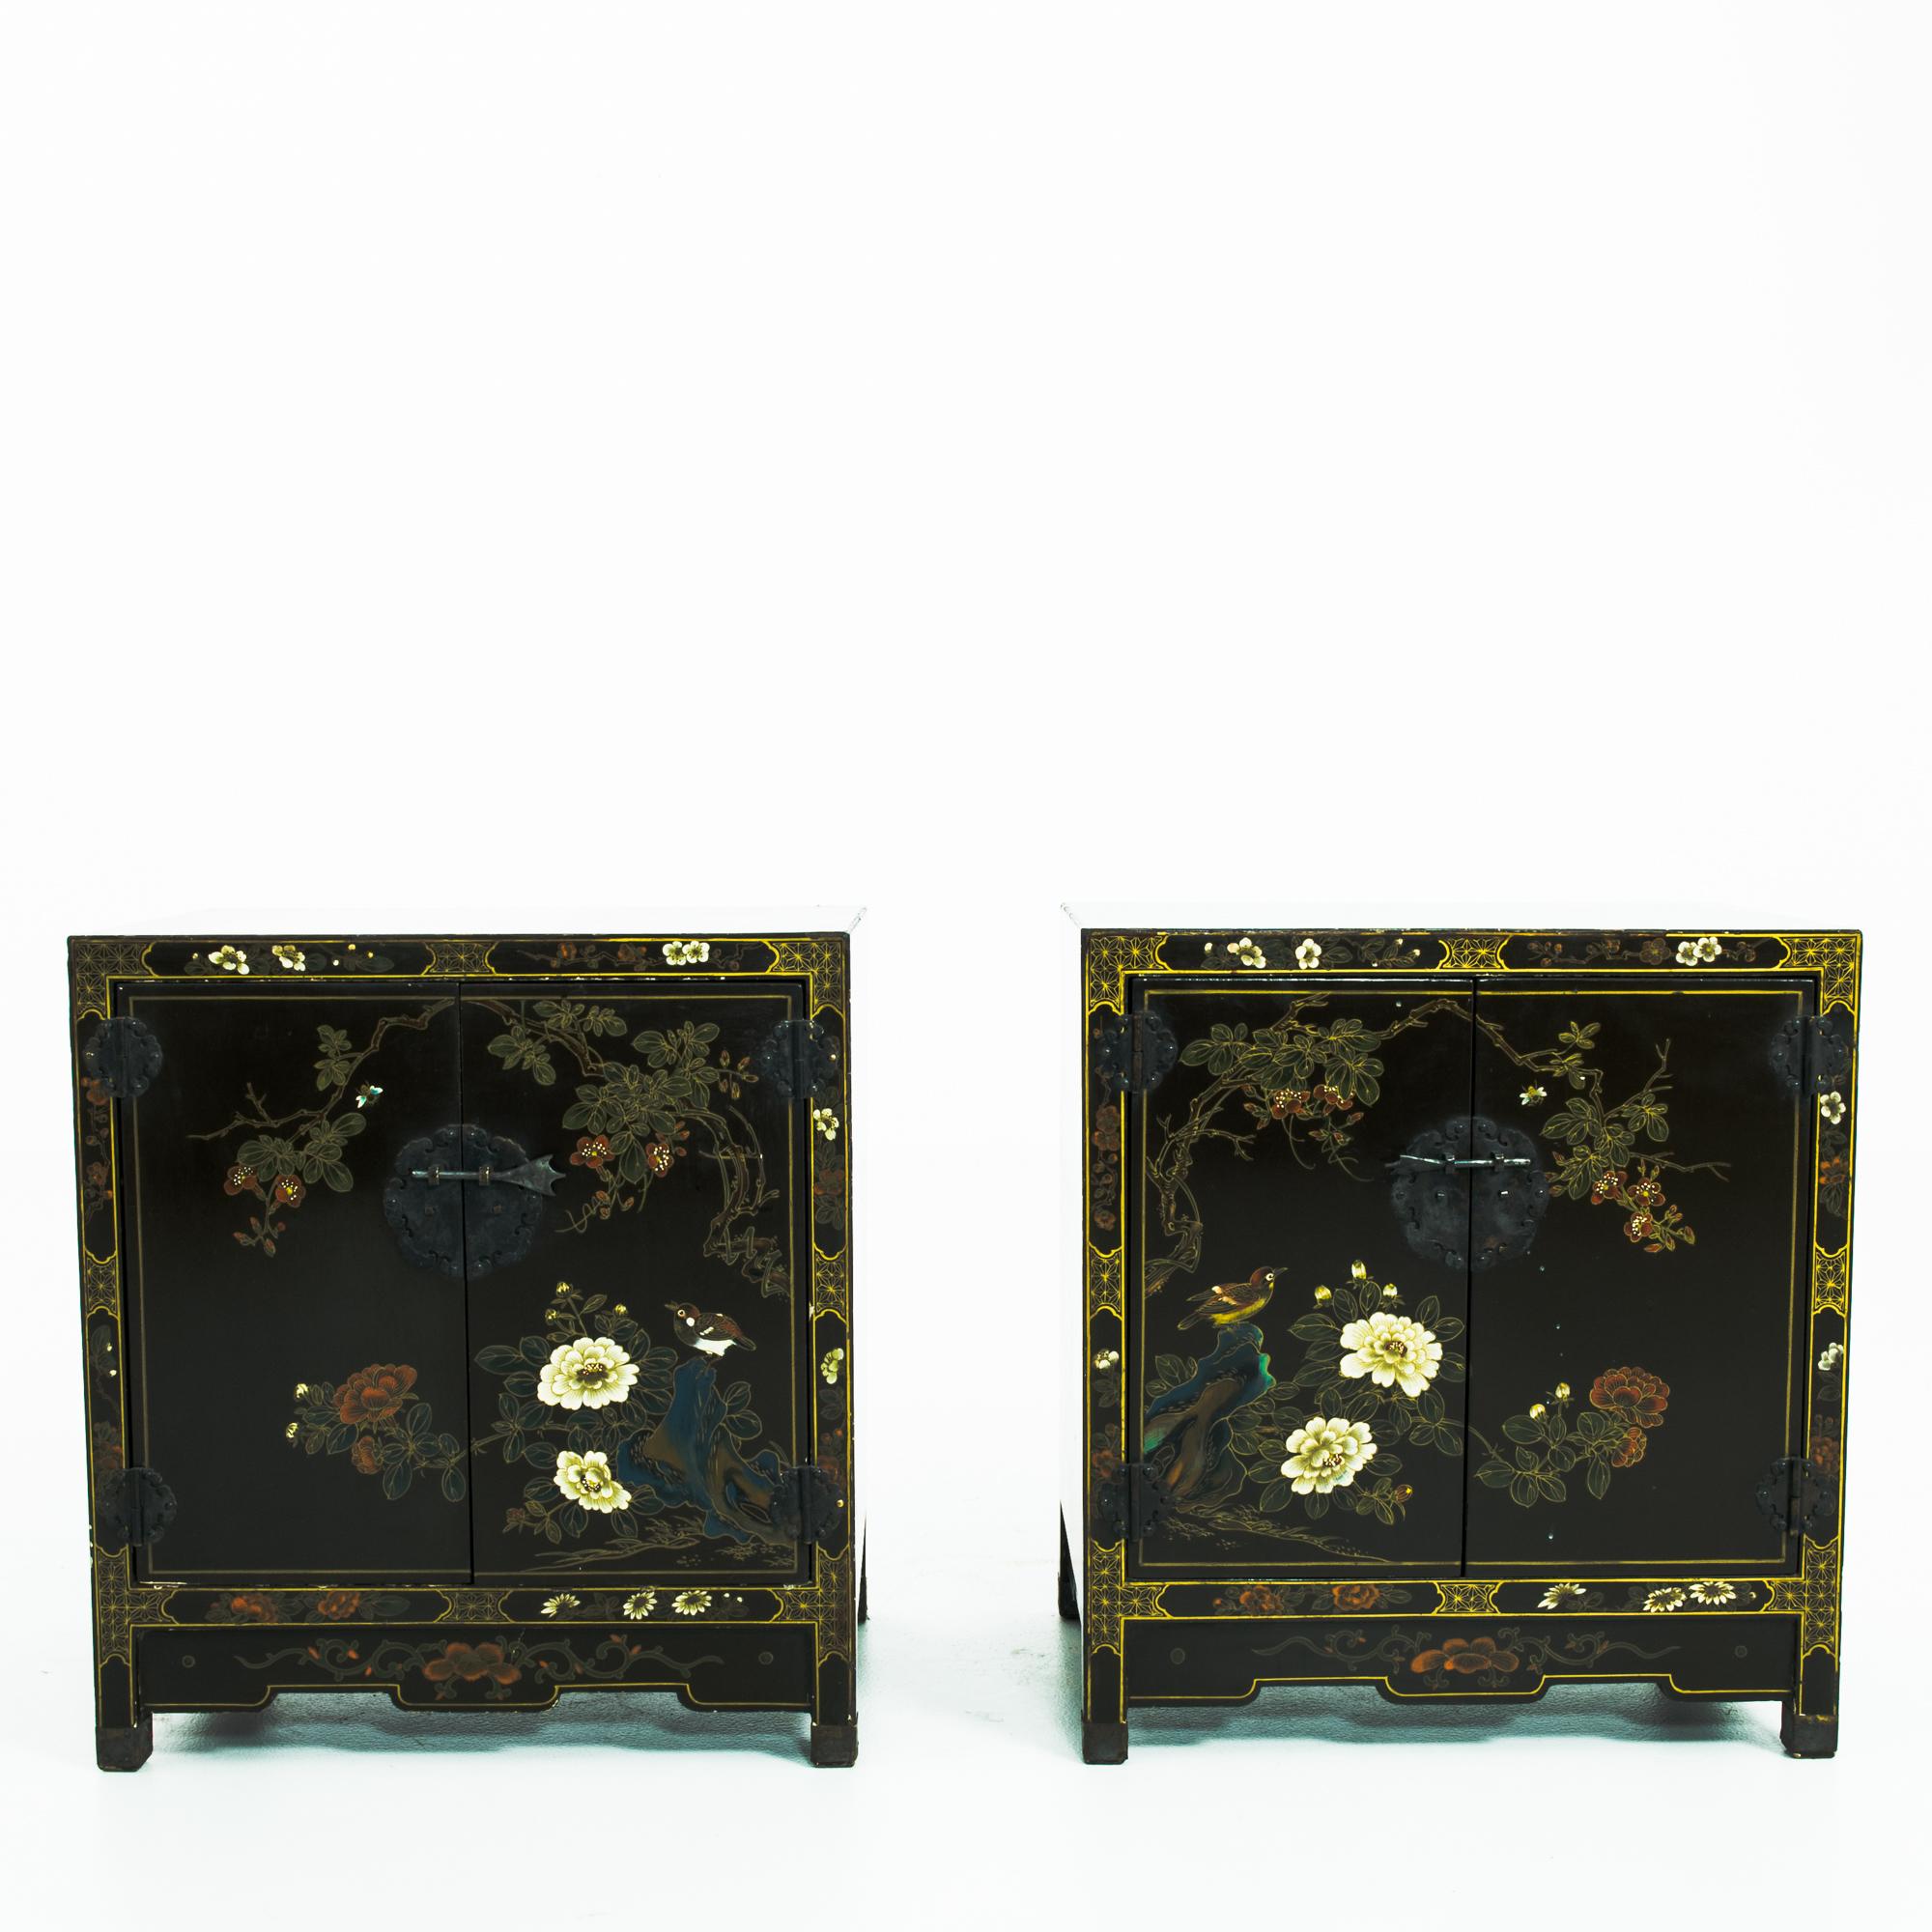 A pair of wooden bedside tables from China, circa 1960. Lacquered wood is decorated with an intricate design of chrysanthemums, plum blossoms and nightingales; gold geometric motifs mark the borders of the frame. The rich colors and exquisite detail